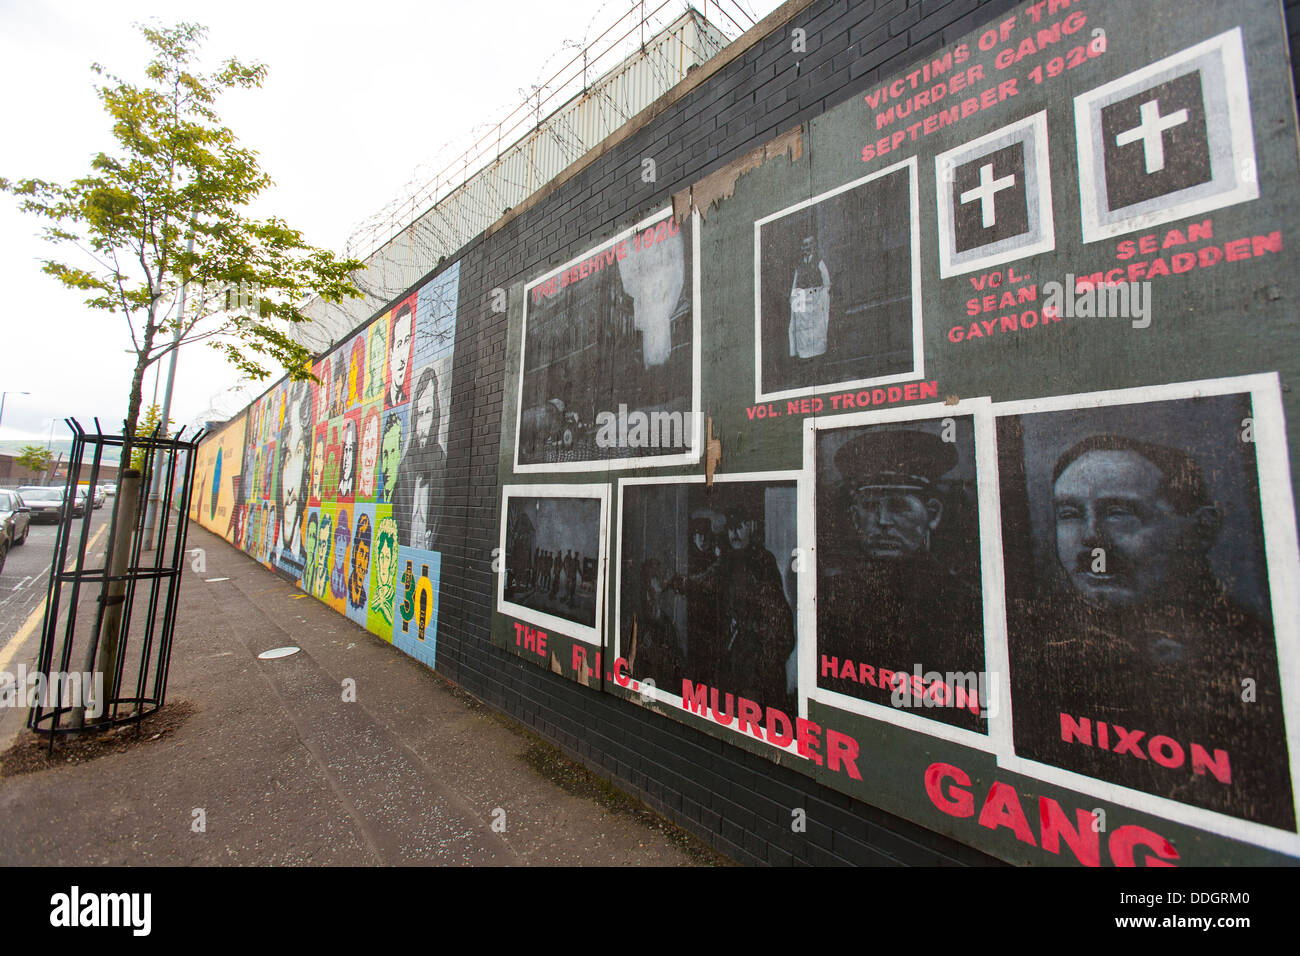 A political mural painted on a wall in Belfast, Northern Ireland depicts those who have died in the struggle against the British Stock Photo